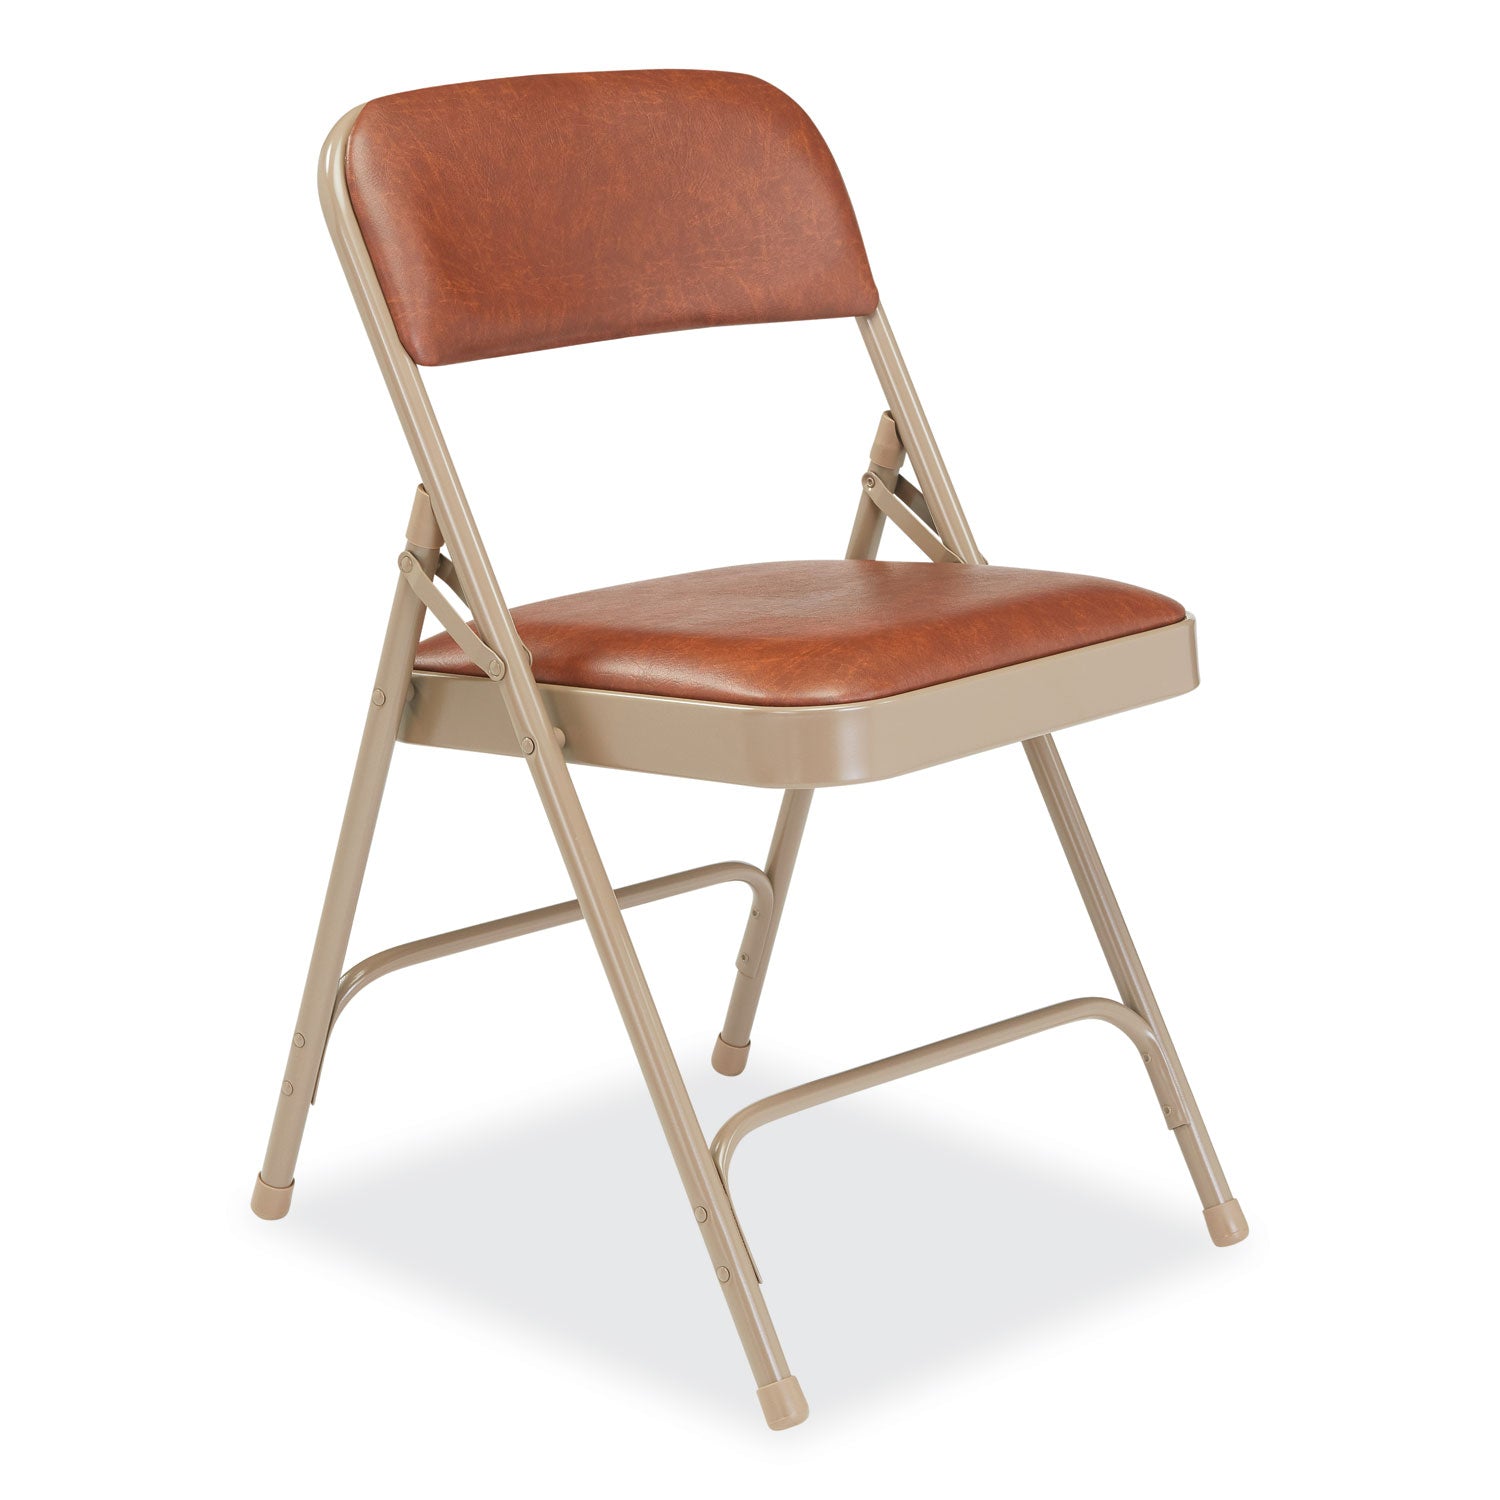 1200-series-vinyl-dual-hinge-folding-chair-supports-500-lb-honey-brown-seat-back-beige-base-4-ct-ships-in-1-3-bus-days_nps1203 - 2